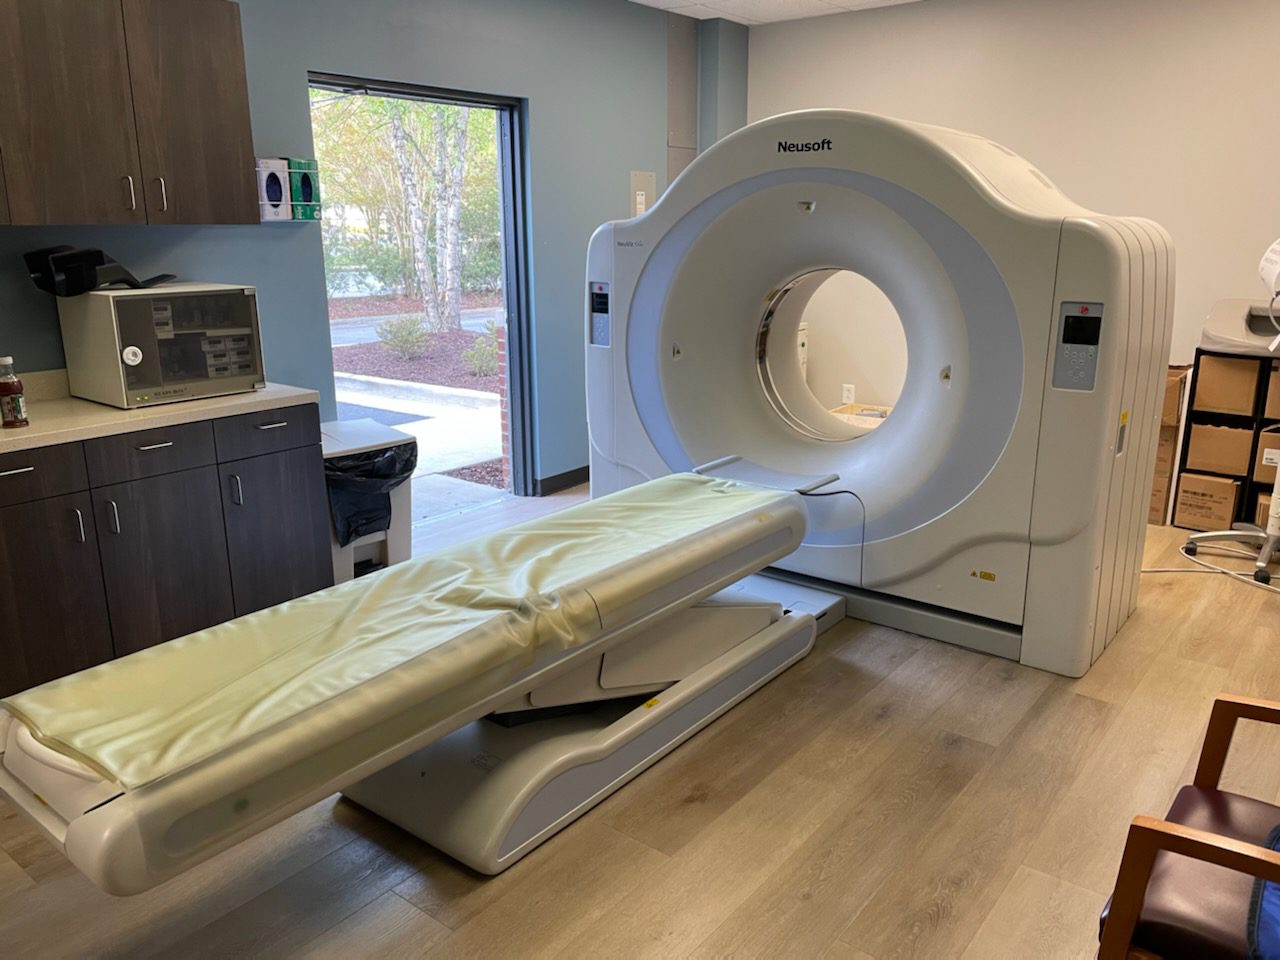 A white mri machine in a room with wood floors.